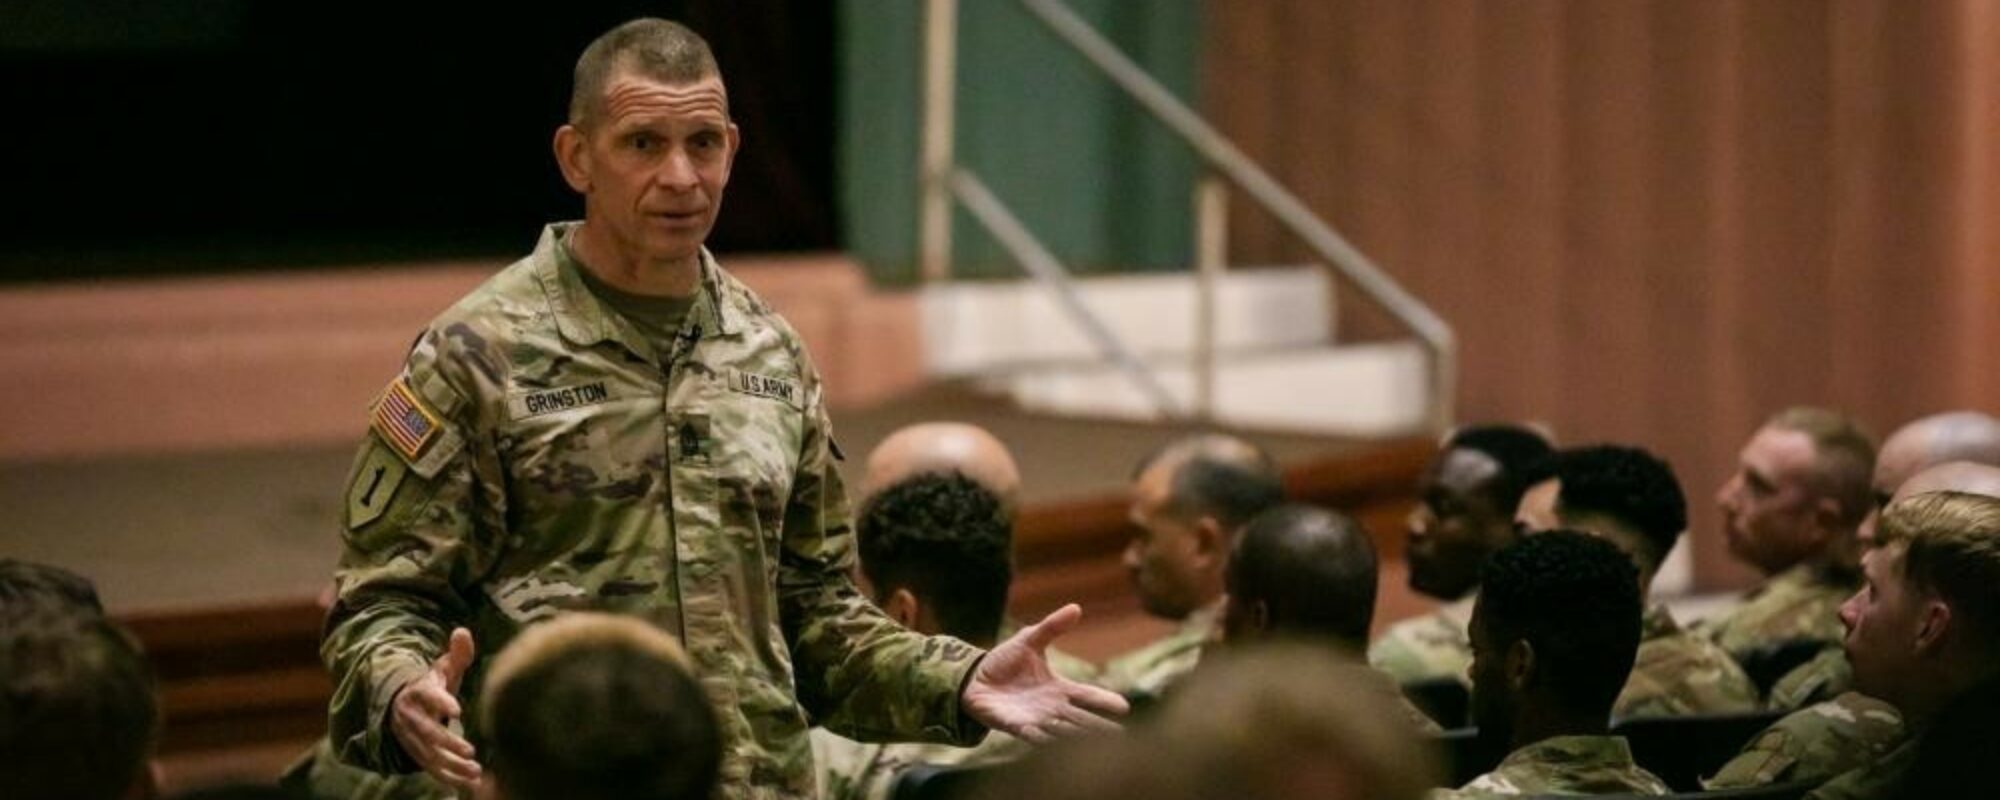 A U.S. Soldier in uniform speaks to an audience of other Soldiers in uniform in an auditorium.